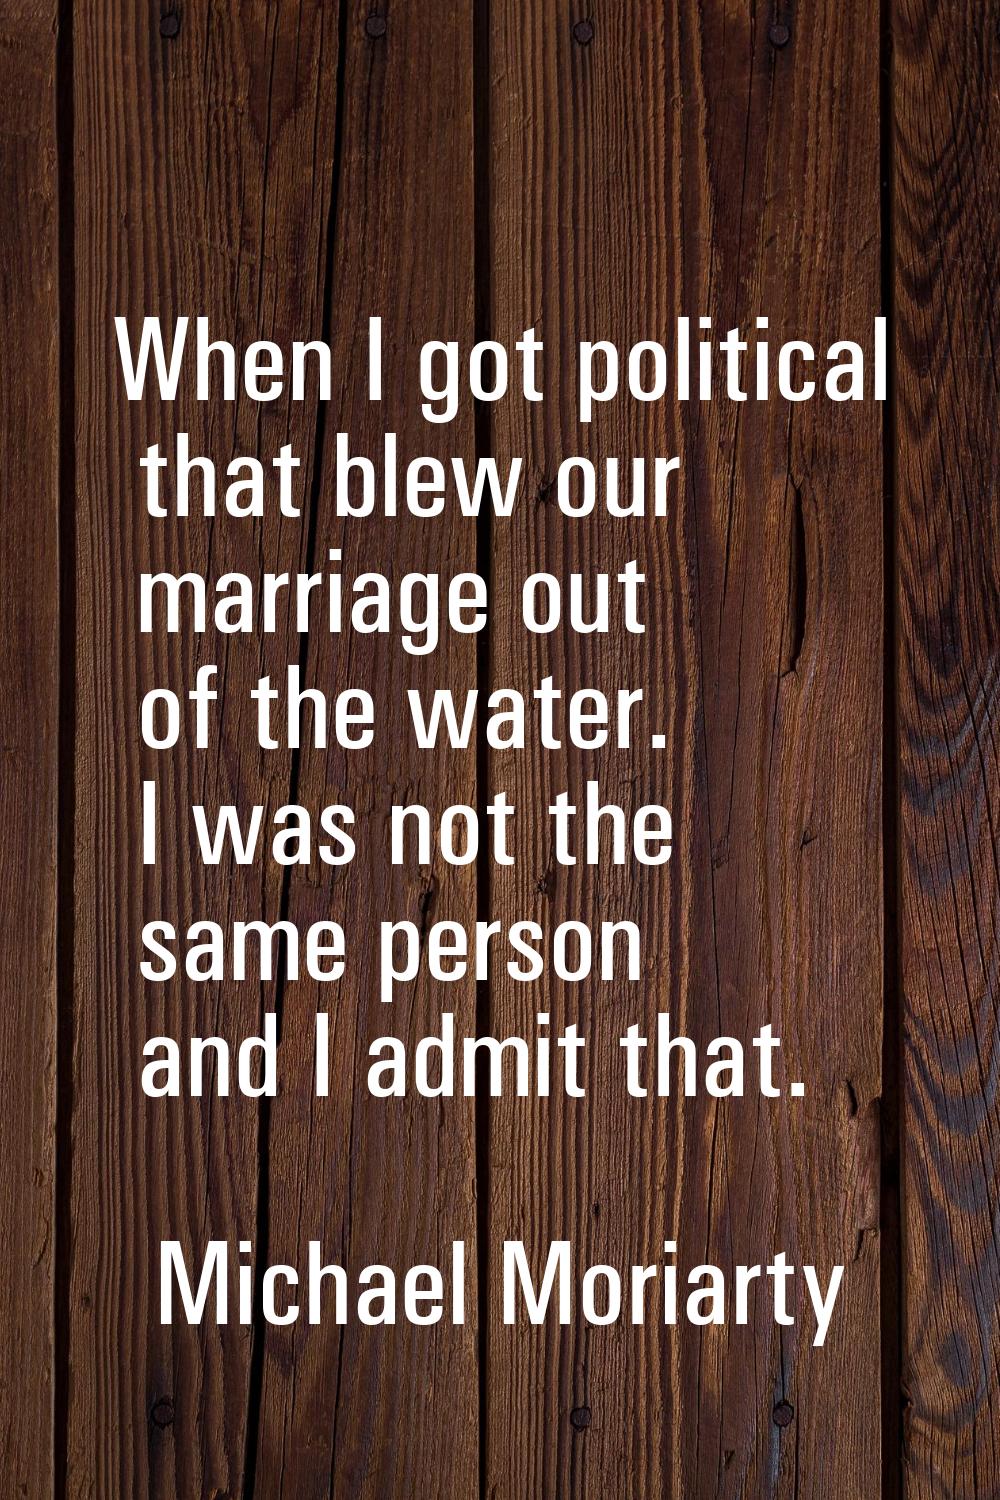 When I got political that blew our marriage out of the water. I was not the same person and I admit